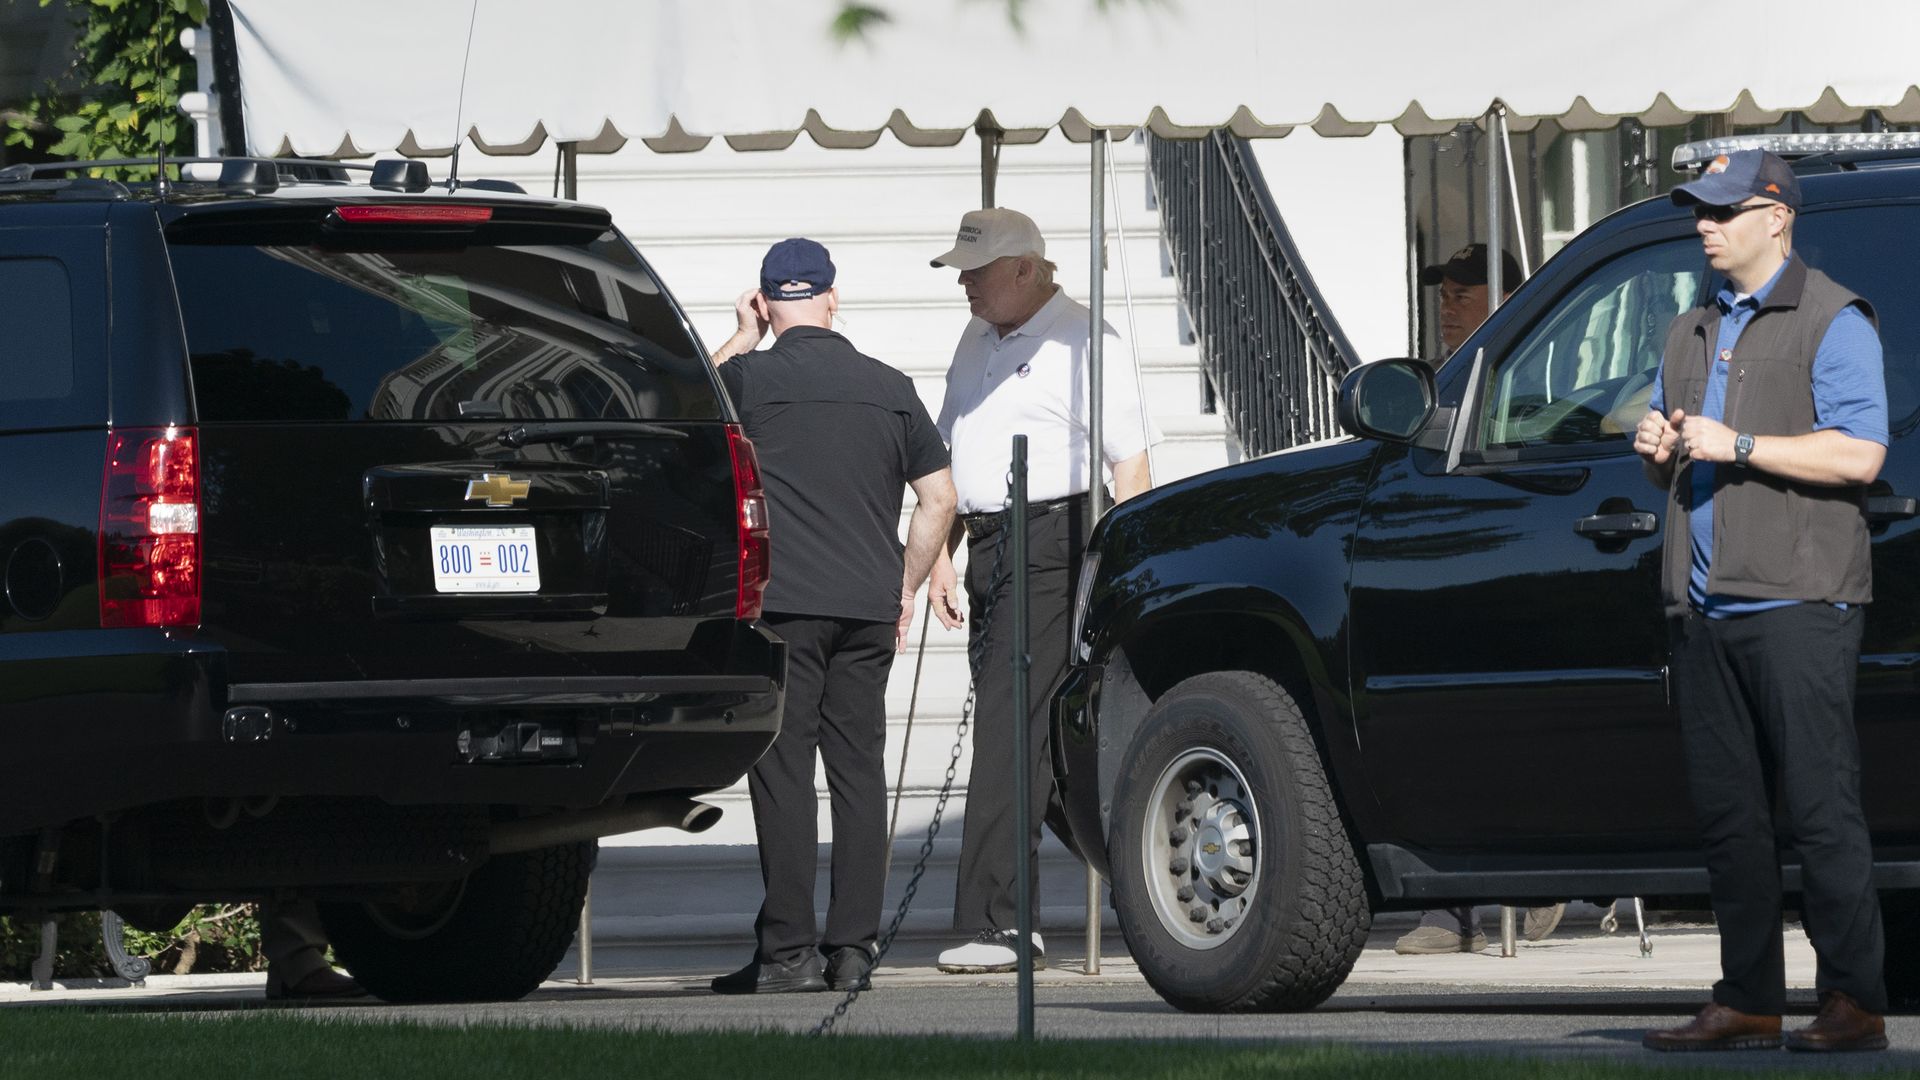 In this image, Trump wears a baseball cap and gets into a black SUV